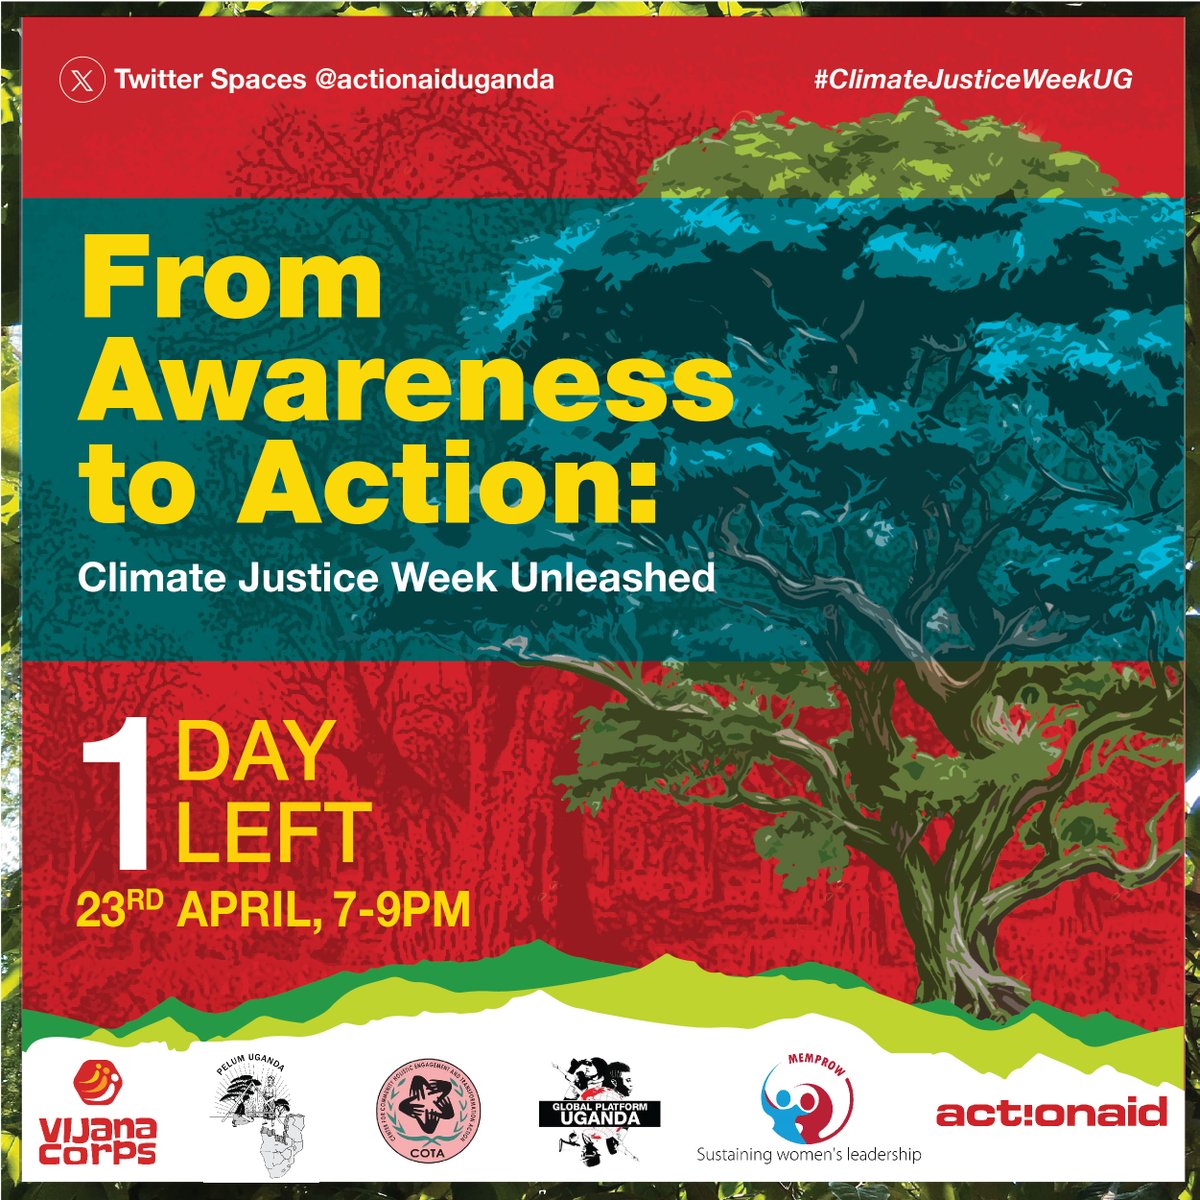 One day to go! Join us tomorrow as we host a Twitter space on climate change from 7-9pm. @vijanacorps @MEMPROWUganda @AyebareDenise @yusufGidudu @Sheila184876117 @actionaid #ClimateJusticeNow #FundOurFuture #ClimateJusticeWeekUG